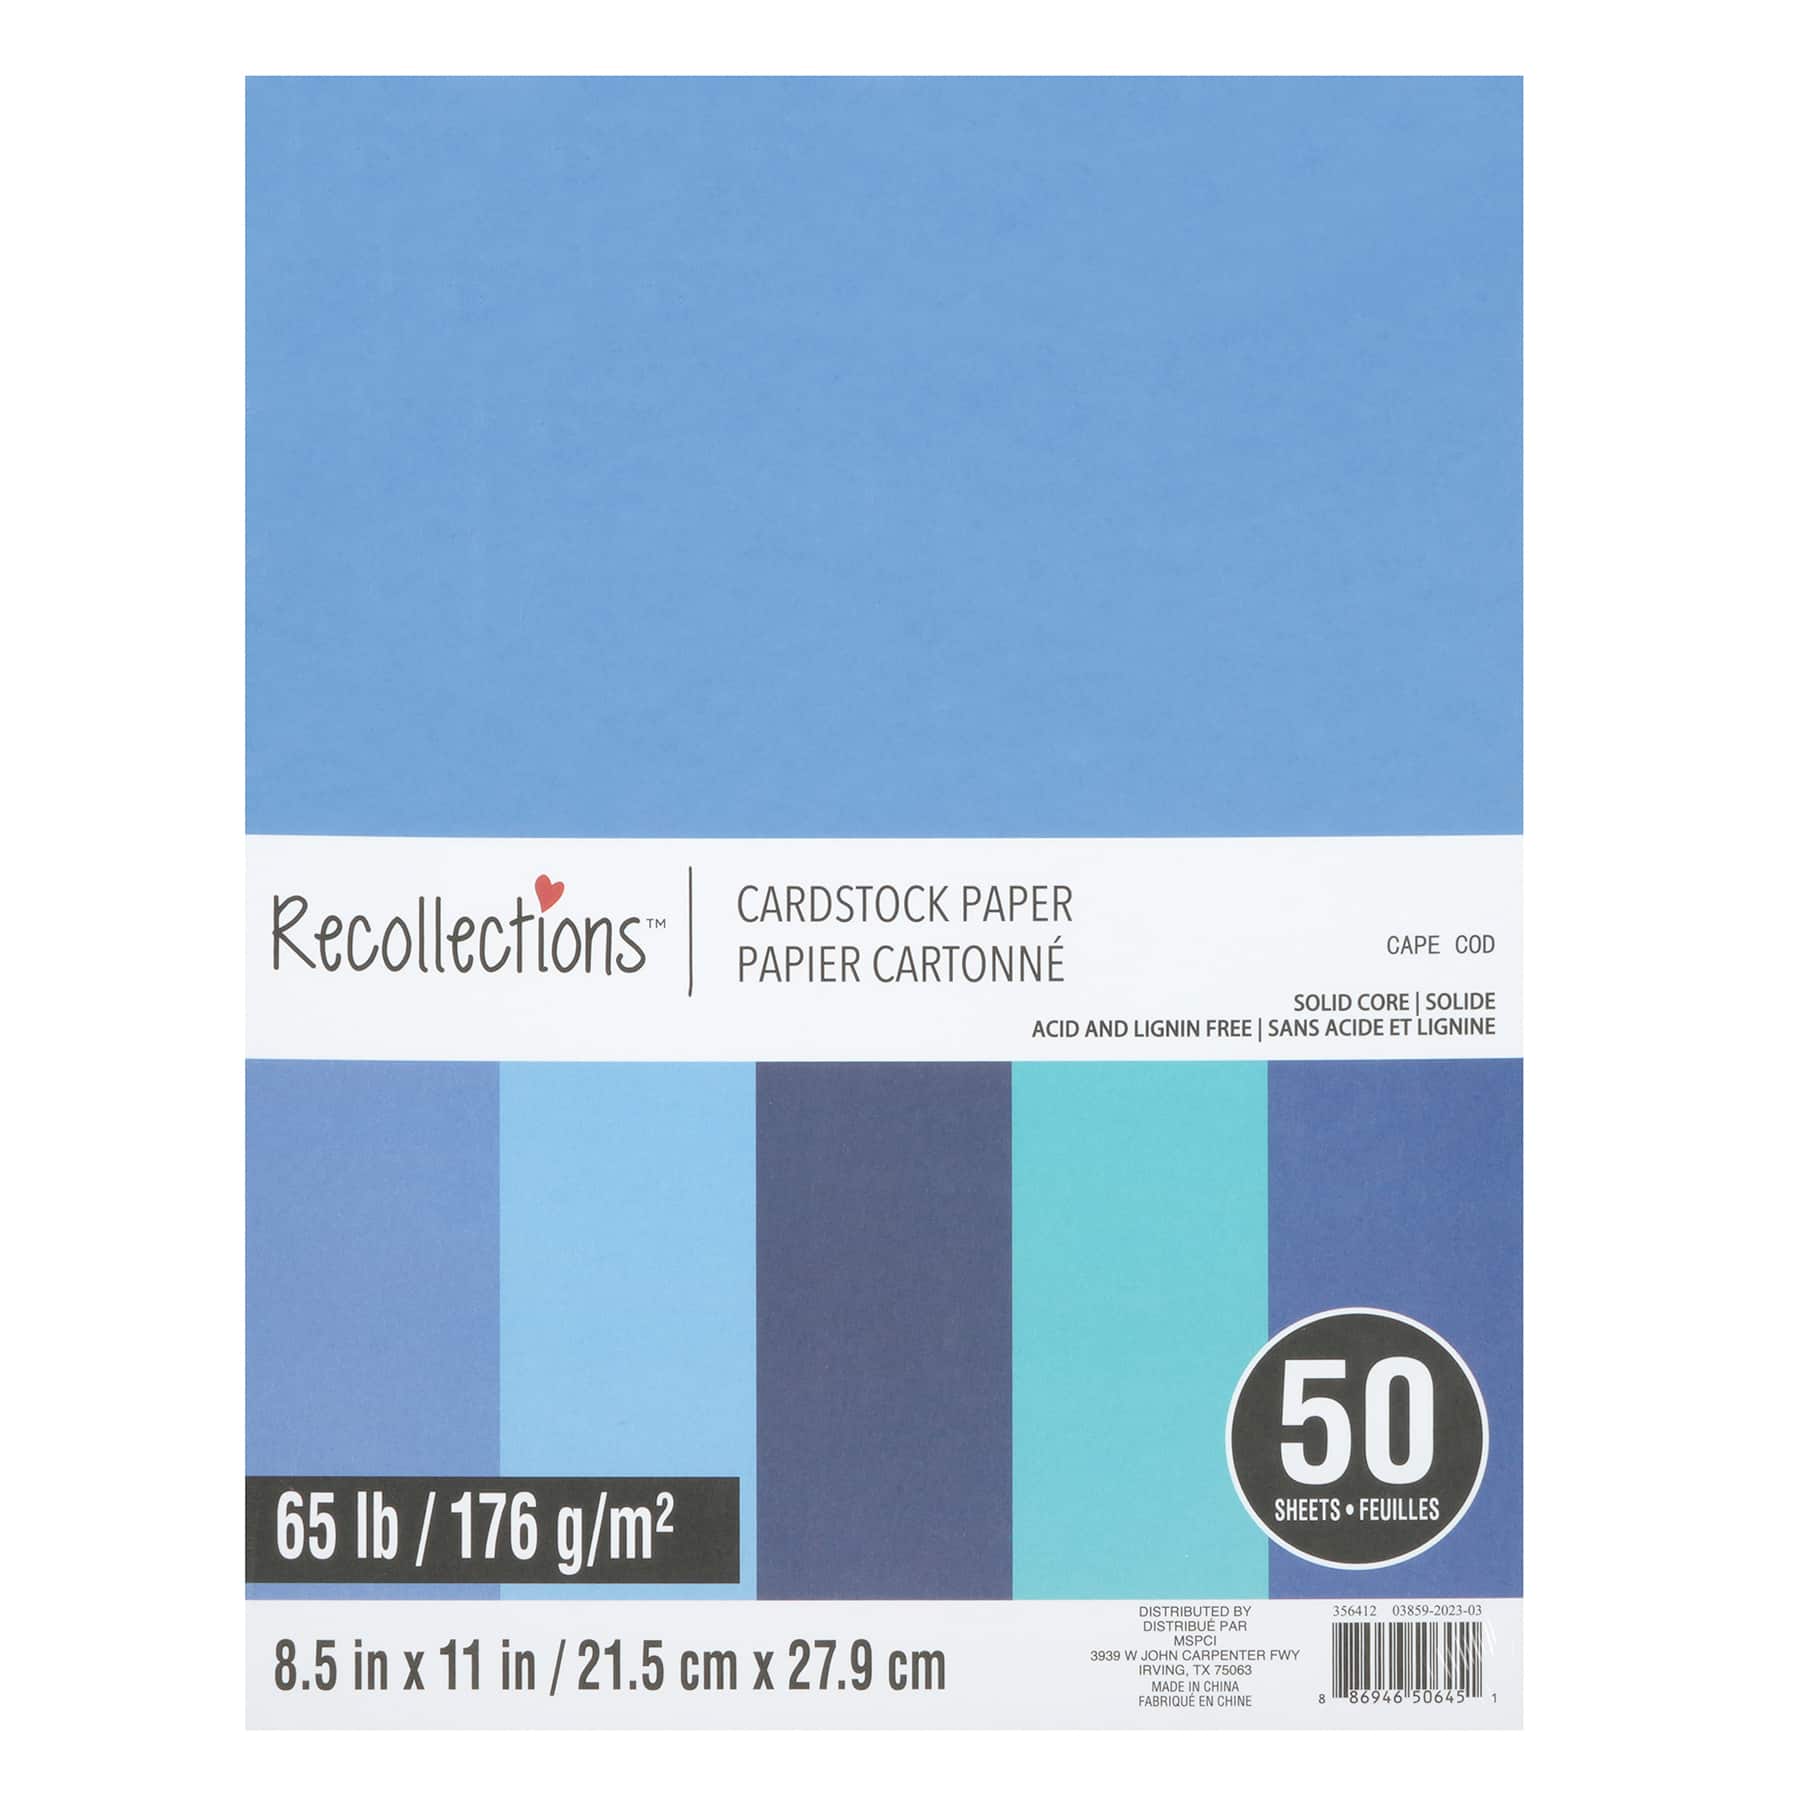 Cape Cod 8.5 x 11 Cardstock Paper by Recollections®, 50 Sheets